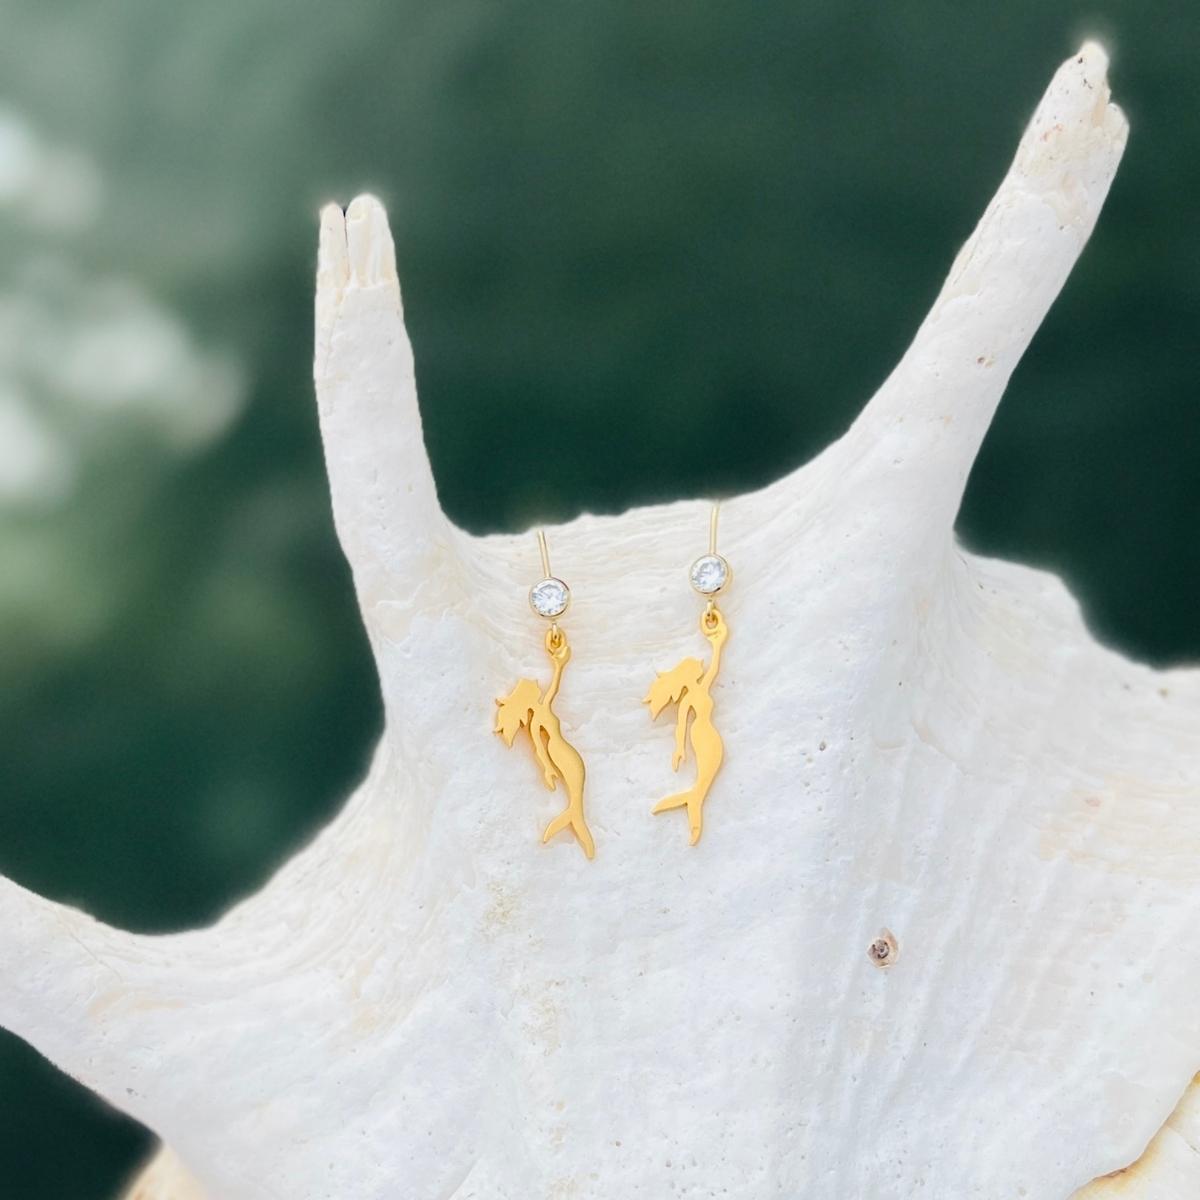 Gold Filled Miss Scuba Mermaid Earrings with Sparkly CZ Crystal This piece reflects Miss Scuba's sense of mystery and individuality, and beckons the free spirit in every self-made women.  Mermaids symbolize Love, Beauty, Mystery, Untamed Spirit and Femininity.